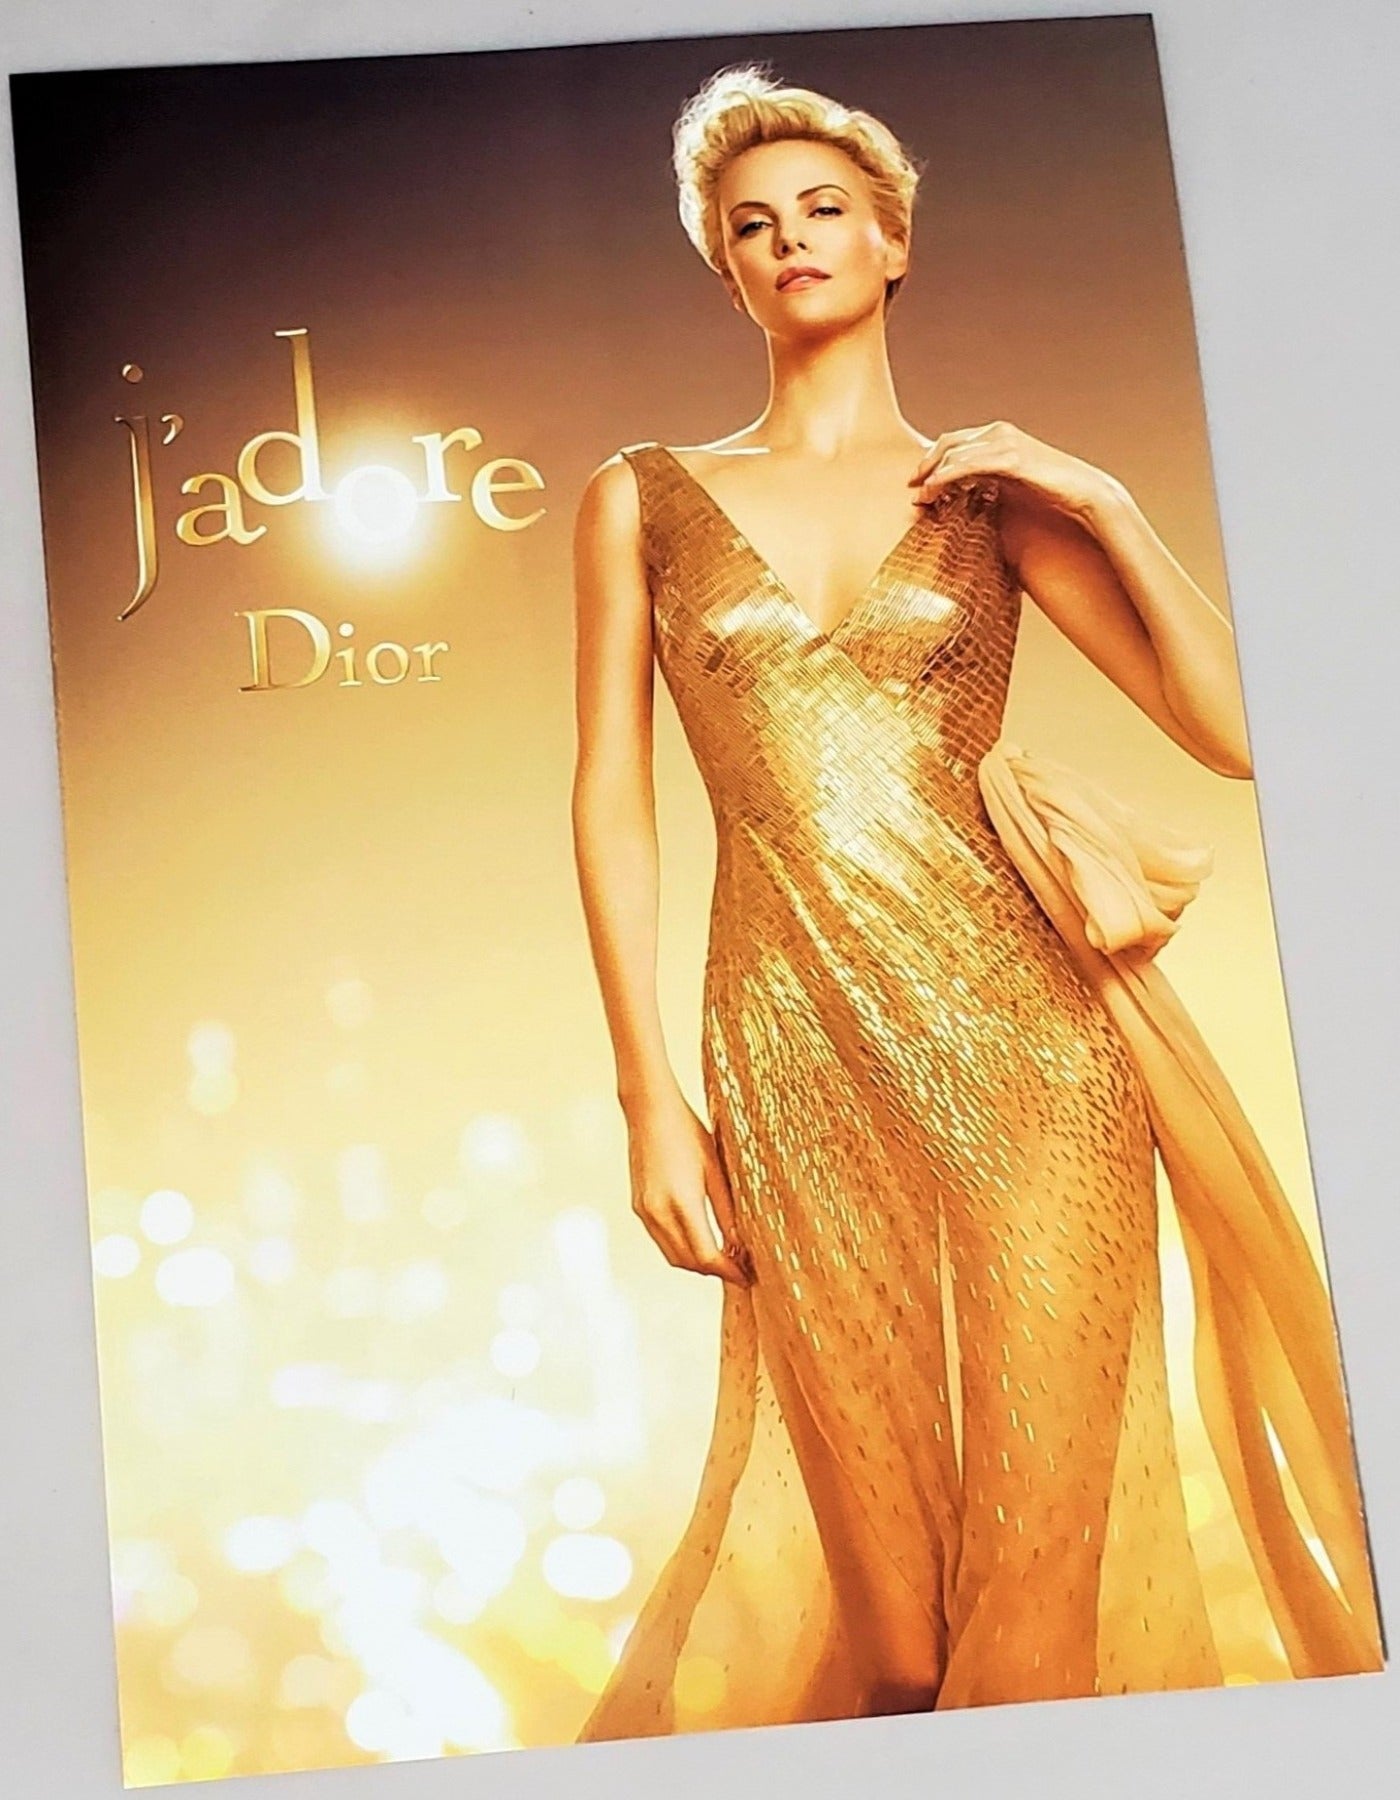 Glossy Charlize Theron for J'adore photograph advertisement page featured in September 2016 Vogue magazine available in area51gallery